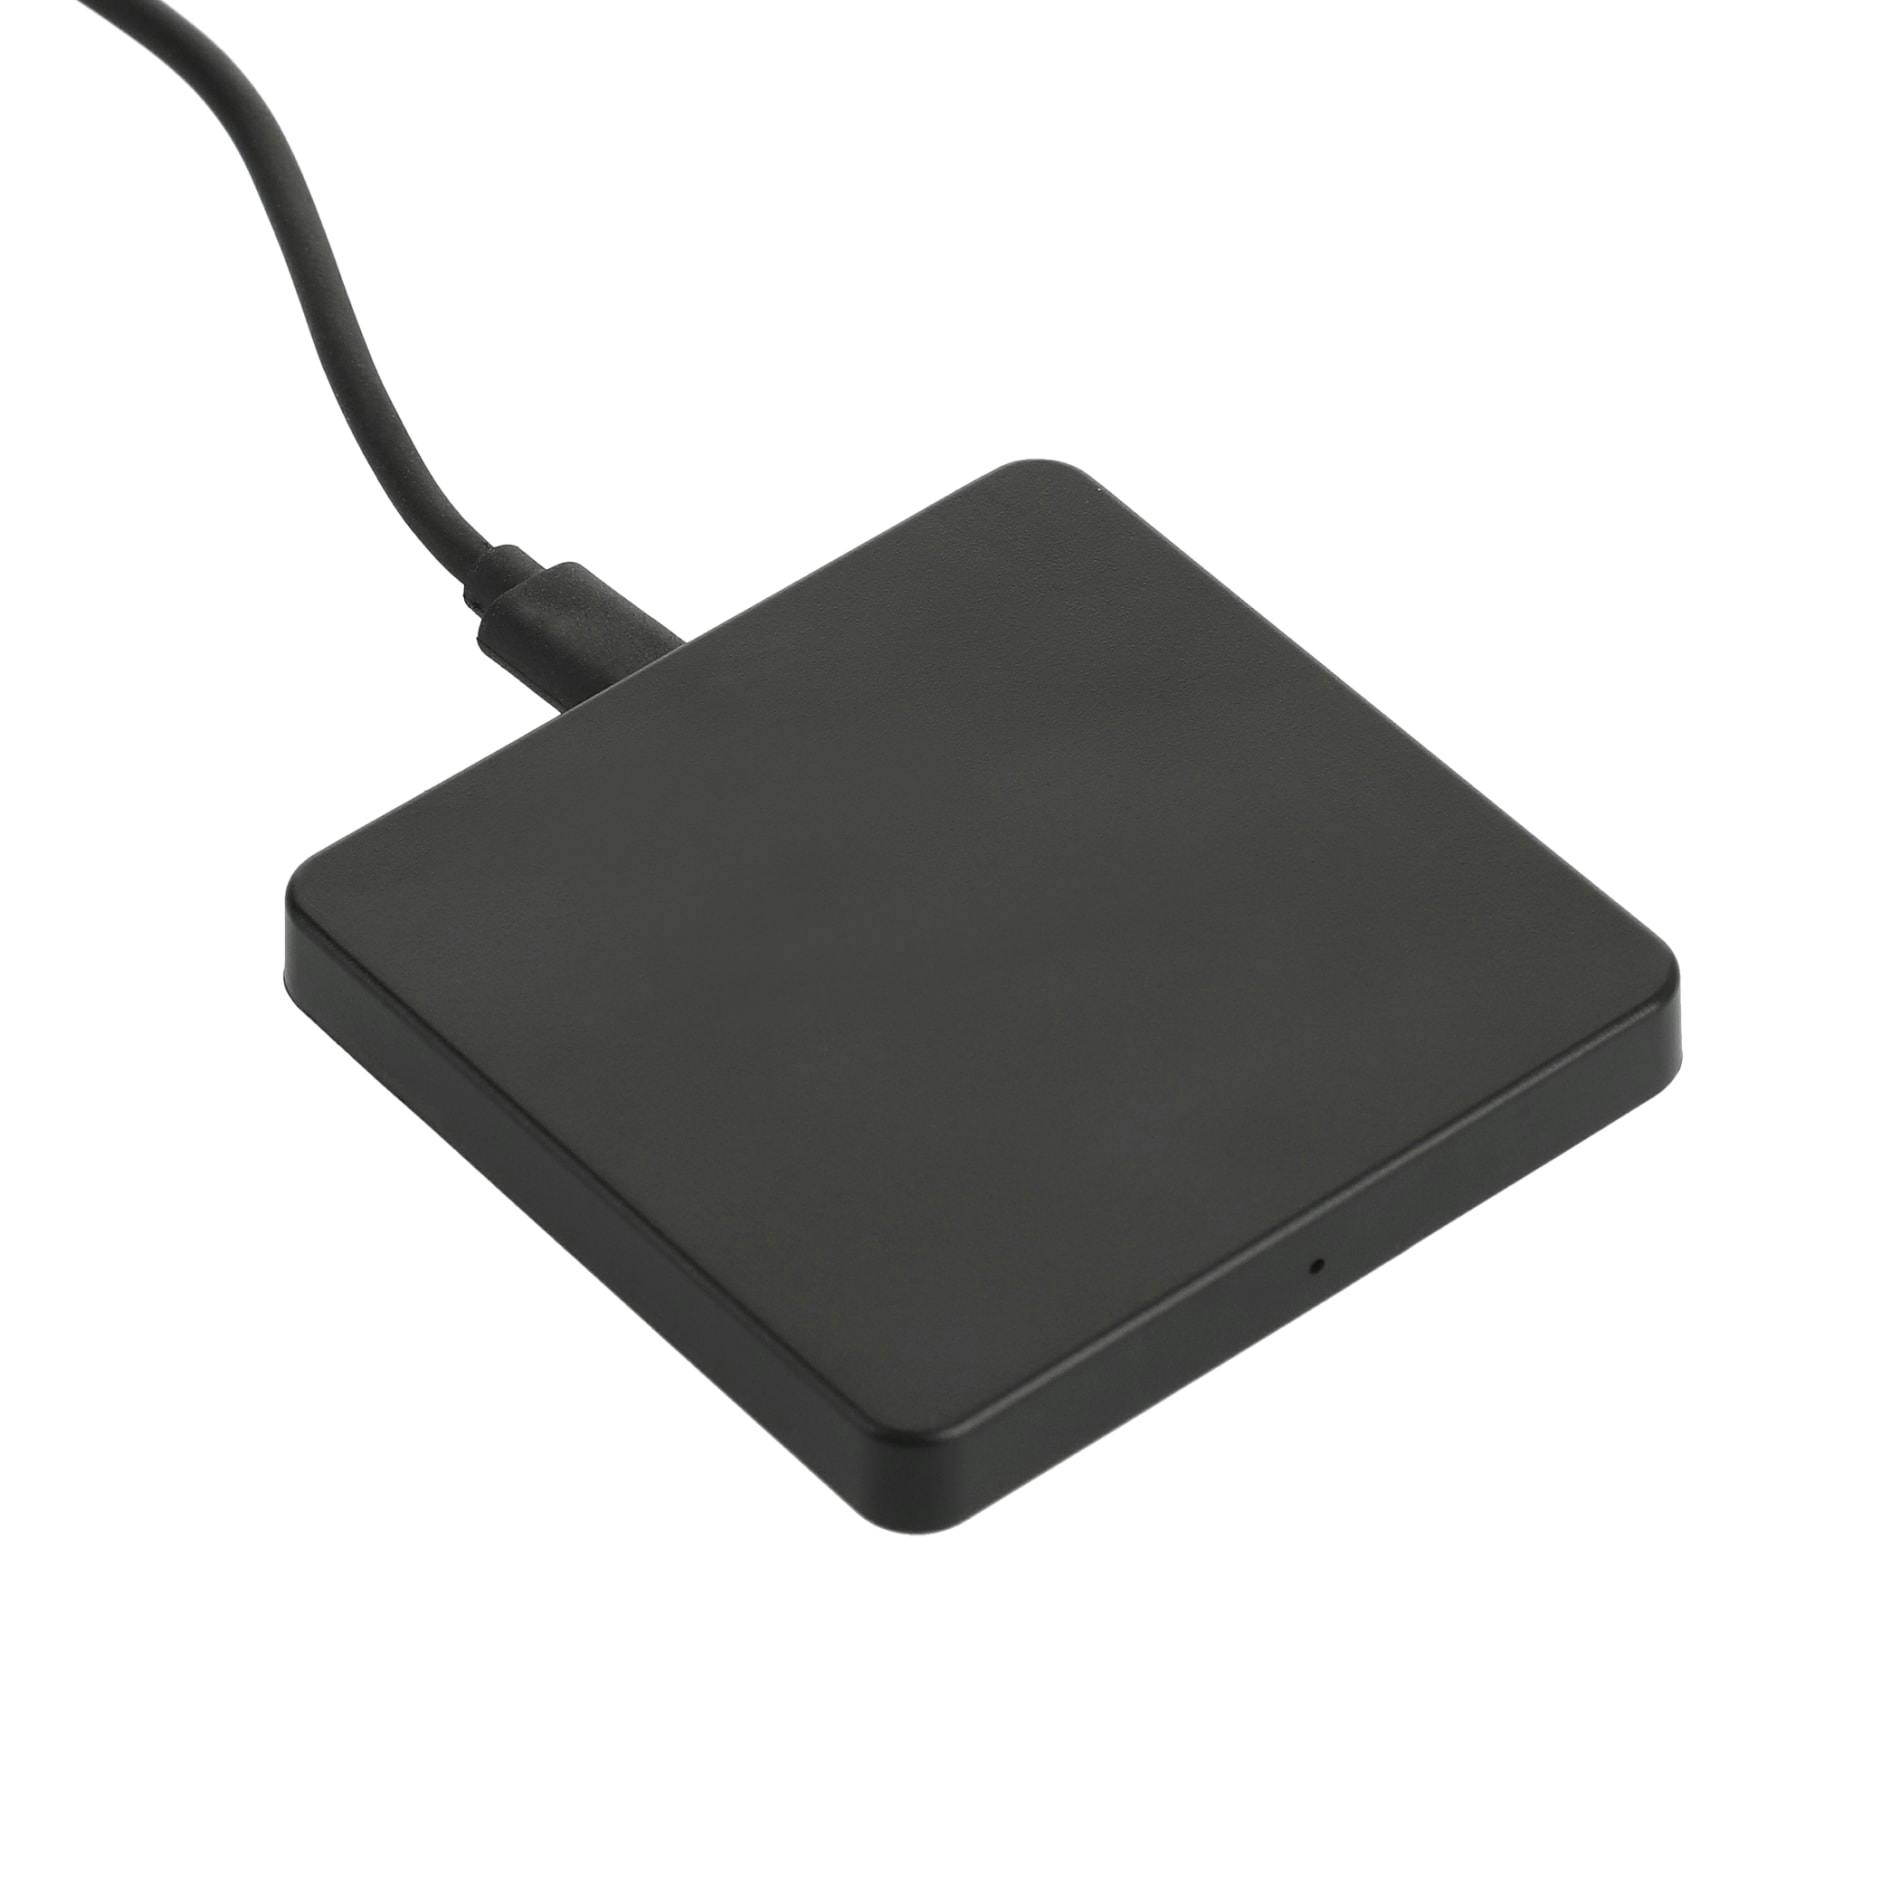 Square Wireless Charging Pad - additional Image 2